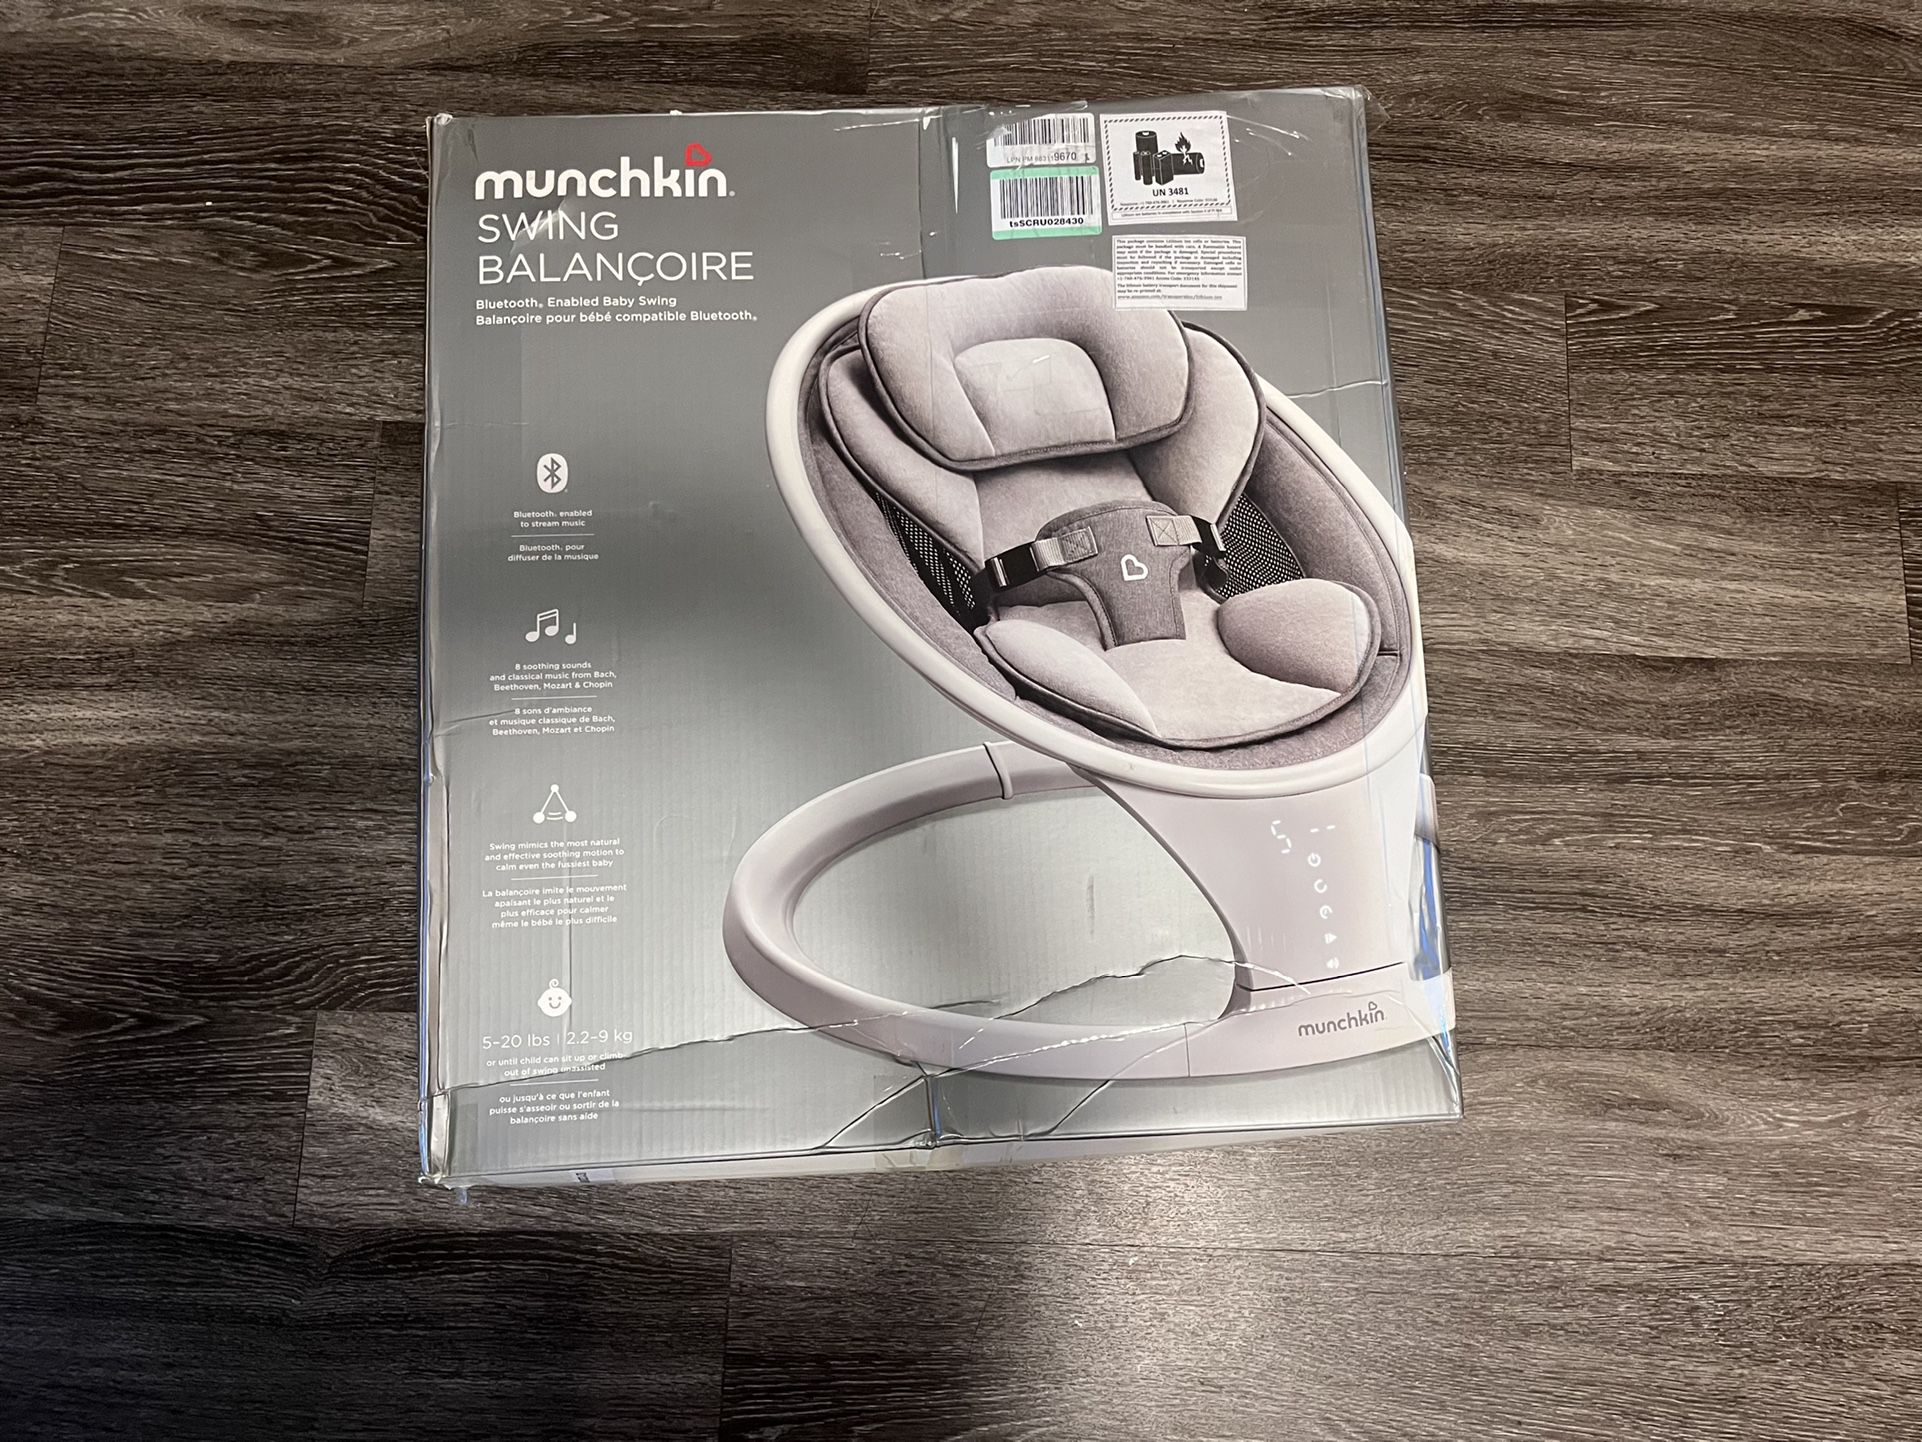 Munchkin Bluetooth Enabled Lightweight Baby Swing with Natural Sway in 5 Ranges of Motion, Includes Remote Control